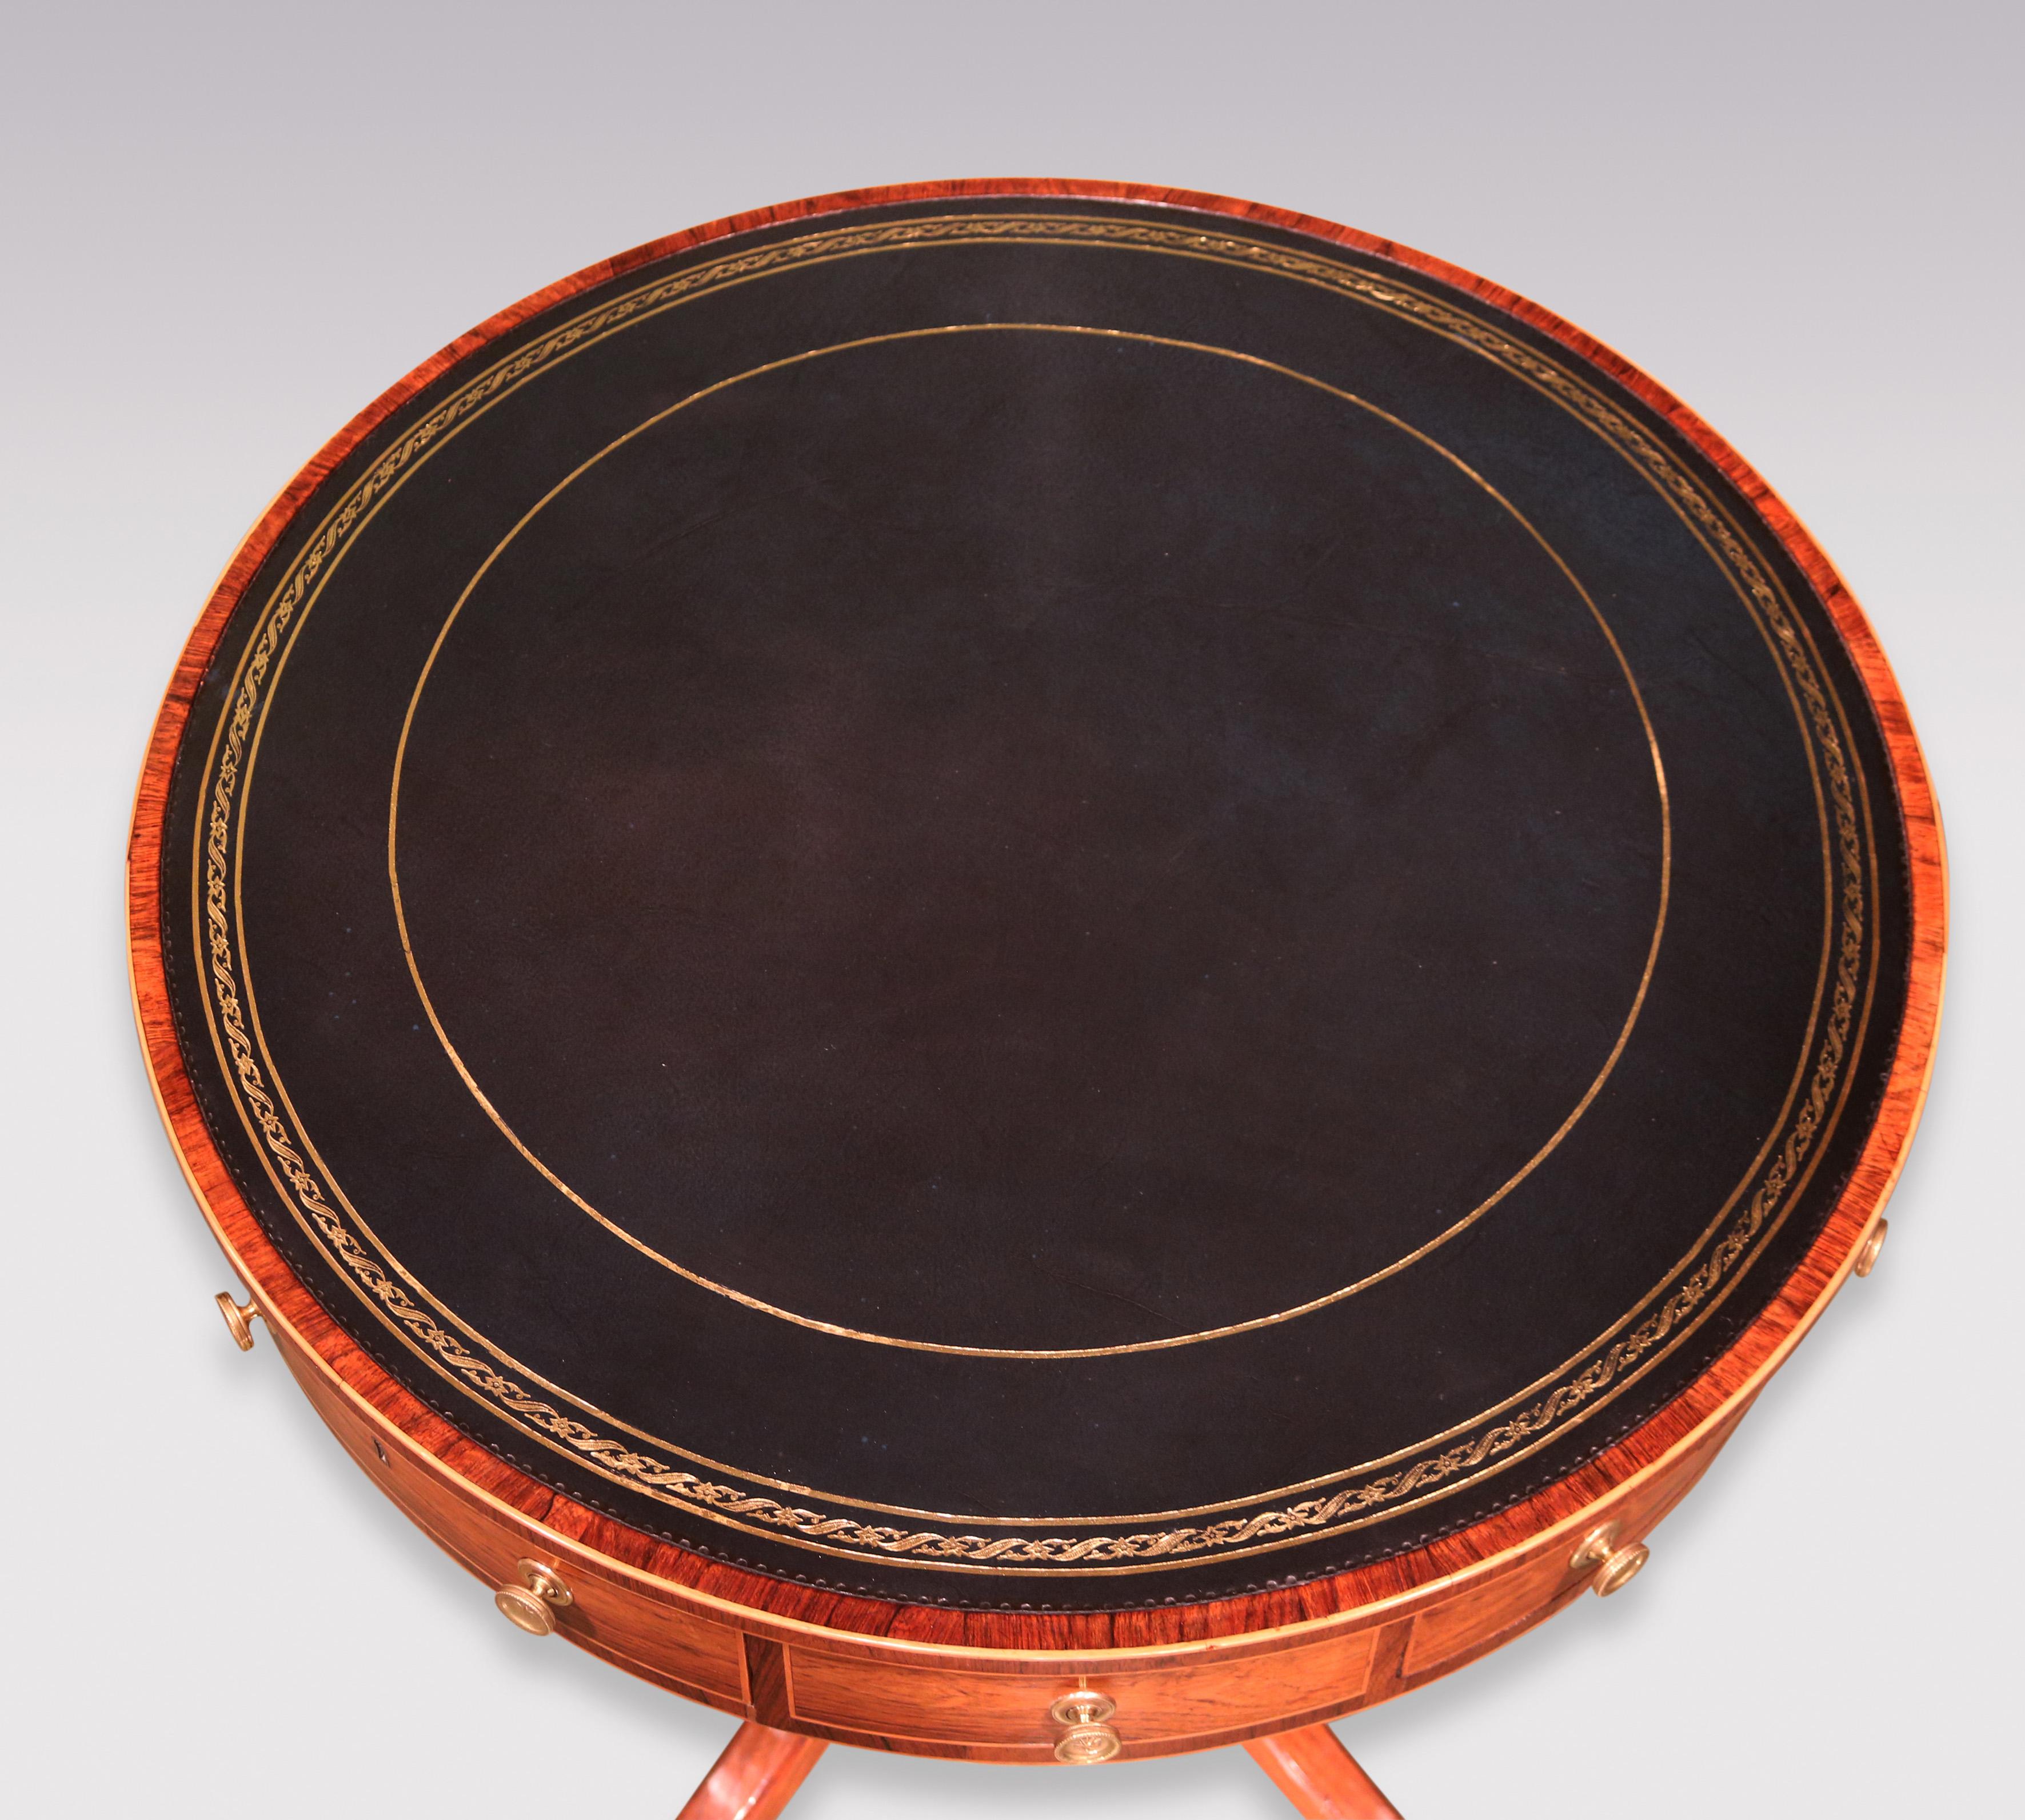 An elegant George III period rosewood Drum Table of attractive small proportions, boxwood strung throughout, having gilt-tooled dark blue leather circular top above 4 opening & 4 dummy drawers, supported on turned gunbarrel stem raised on 4